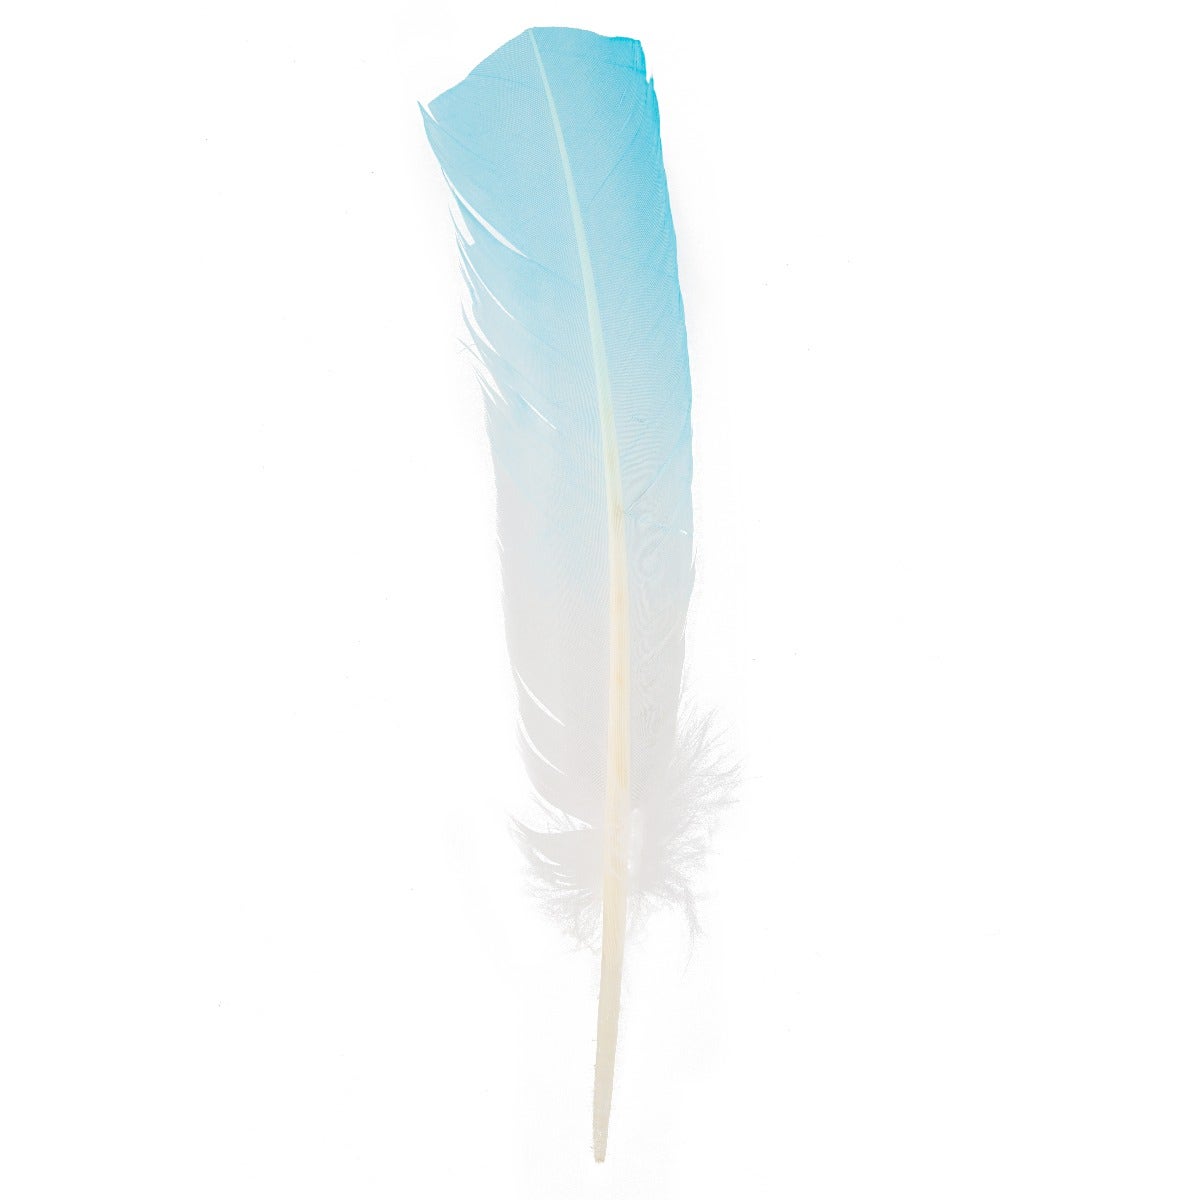 Bulk Two Tone Ombre Tipped Turkey Round Feathers - 10-12” - 1/4 lb - Light Turquoise/White